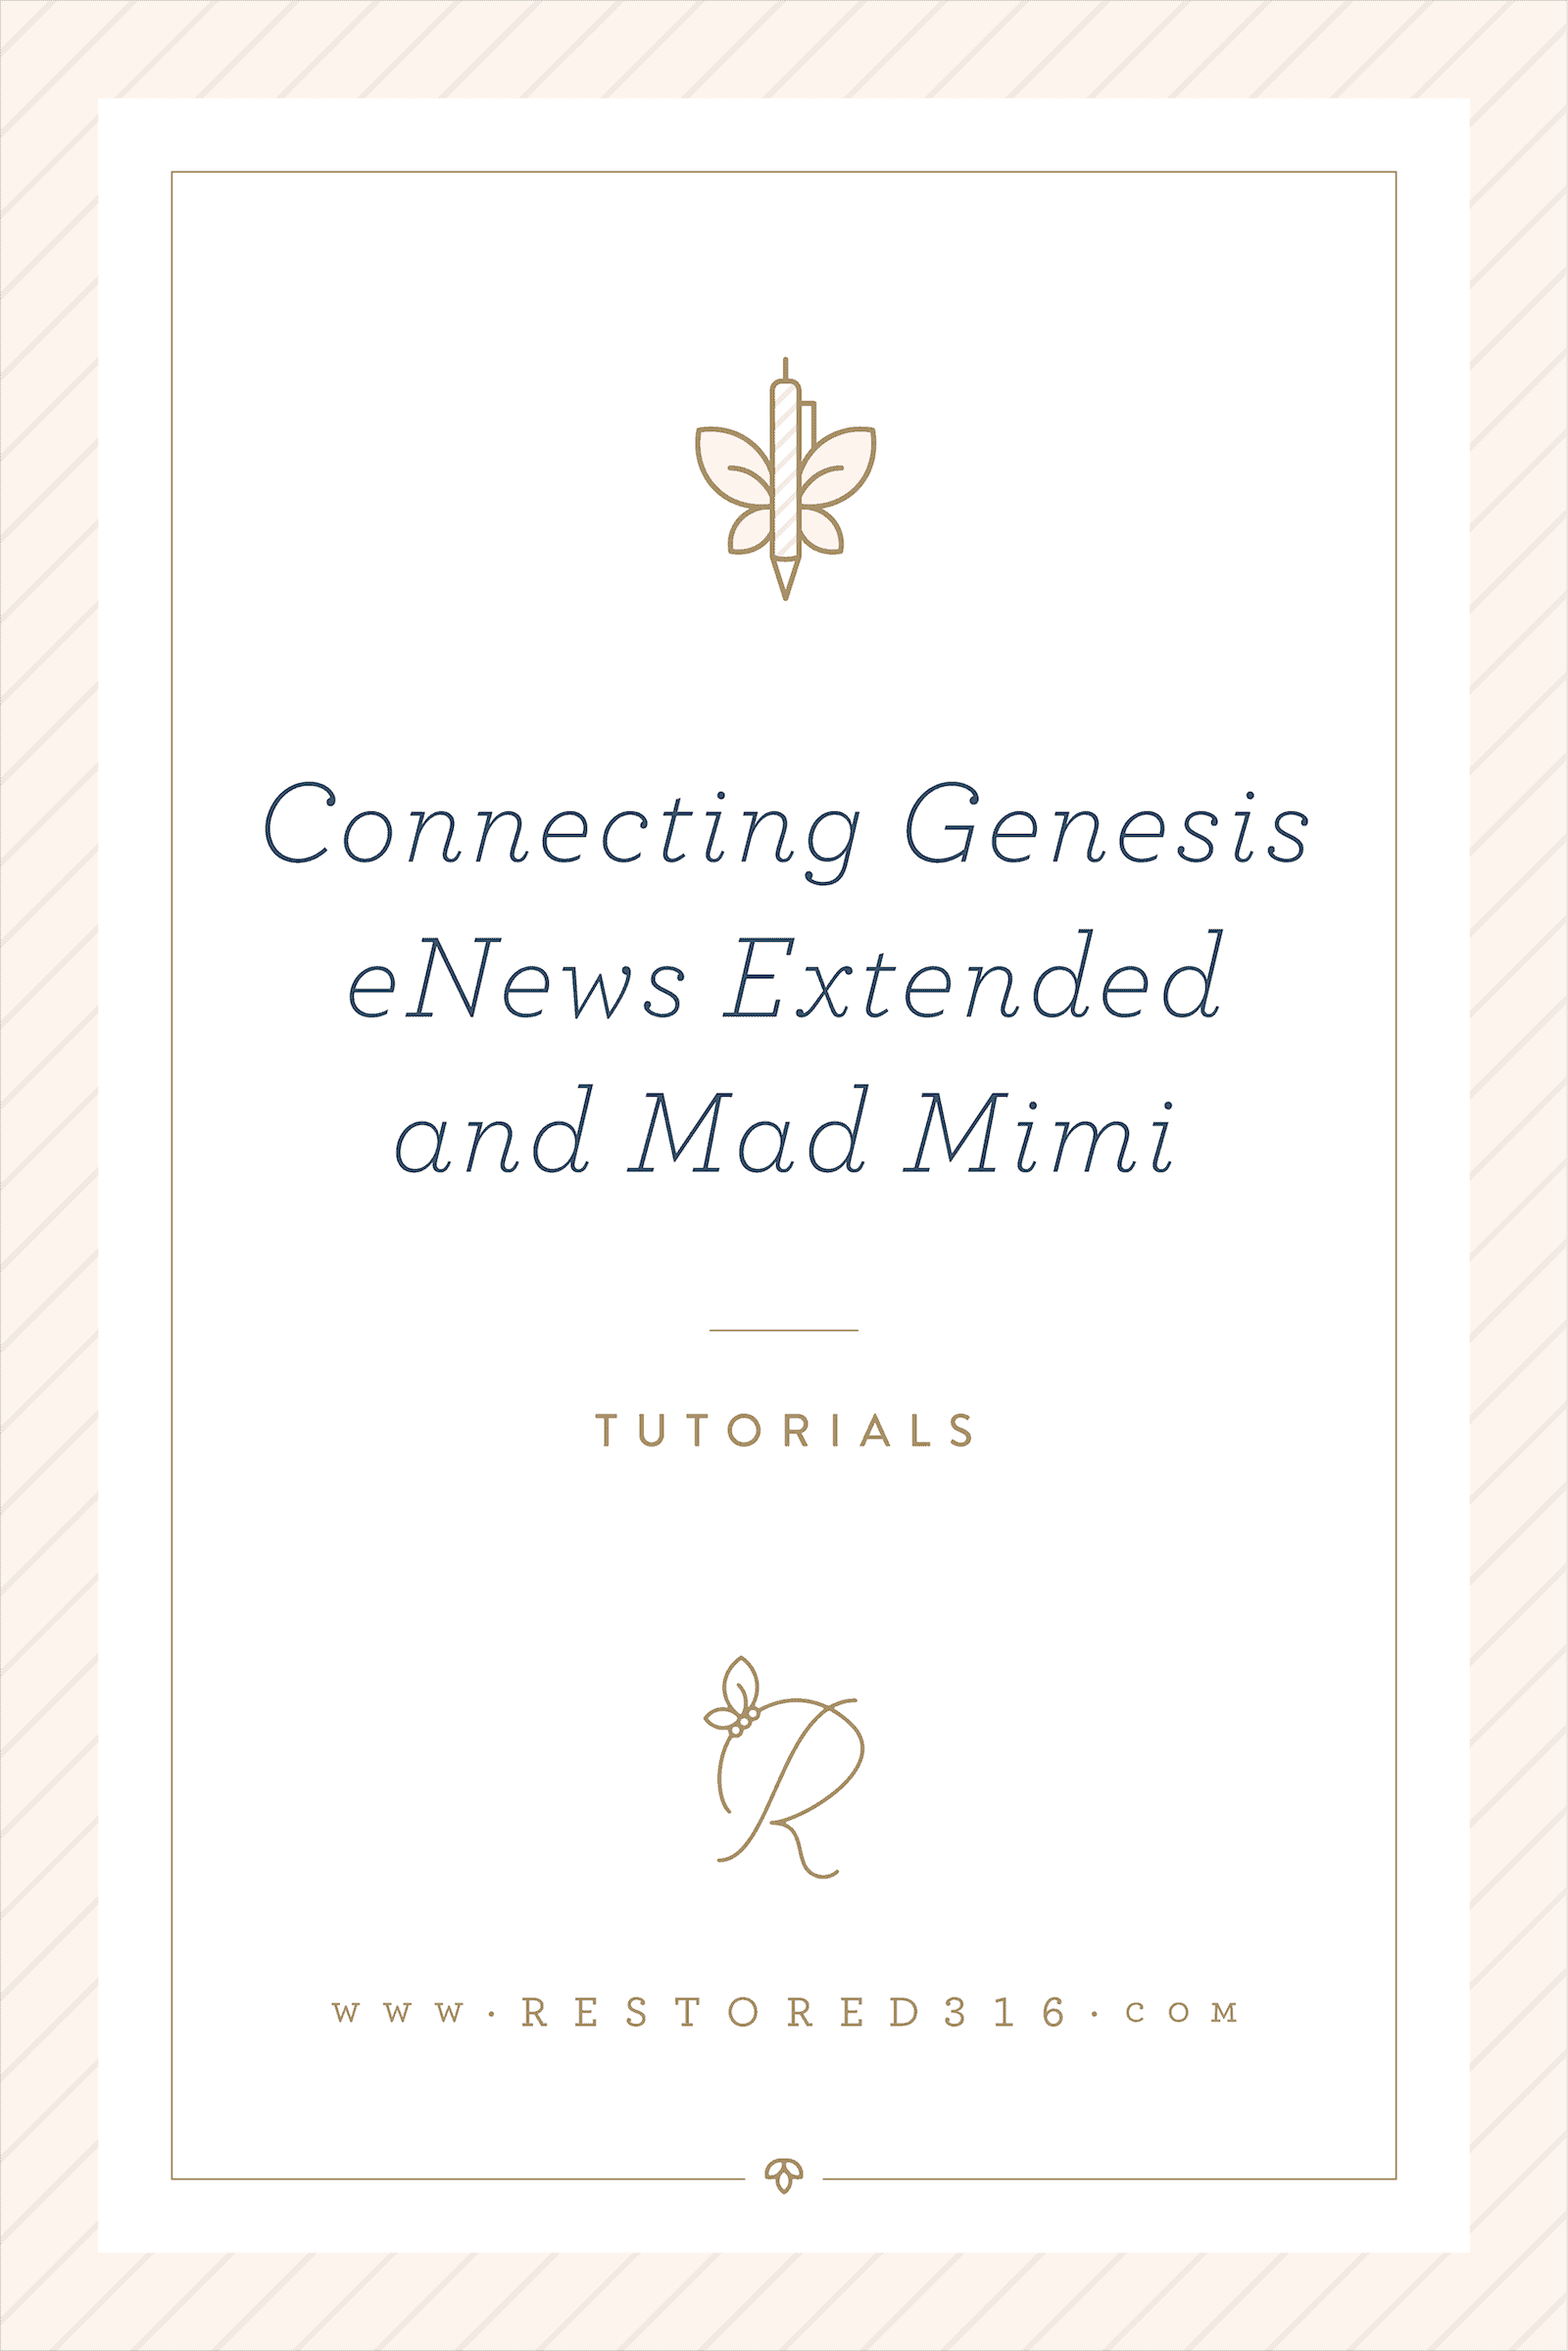 Connecting Genesis eNews Extended with Mad Mimi